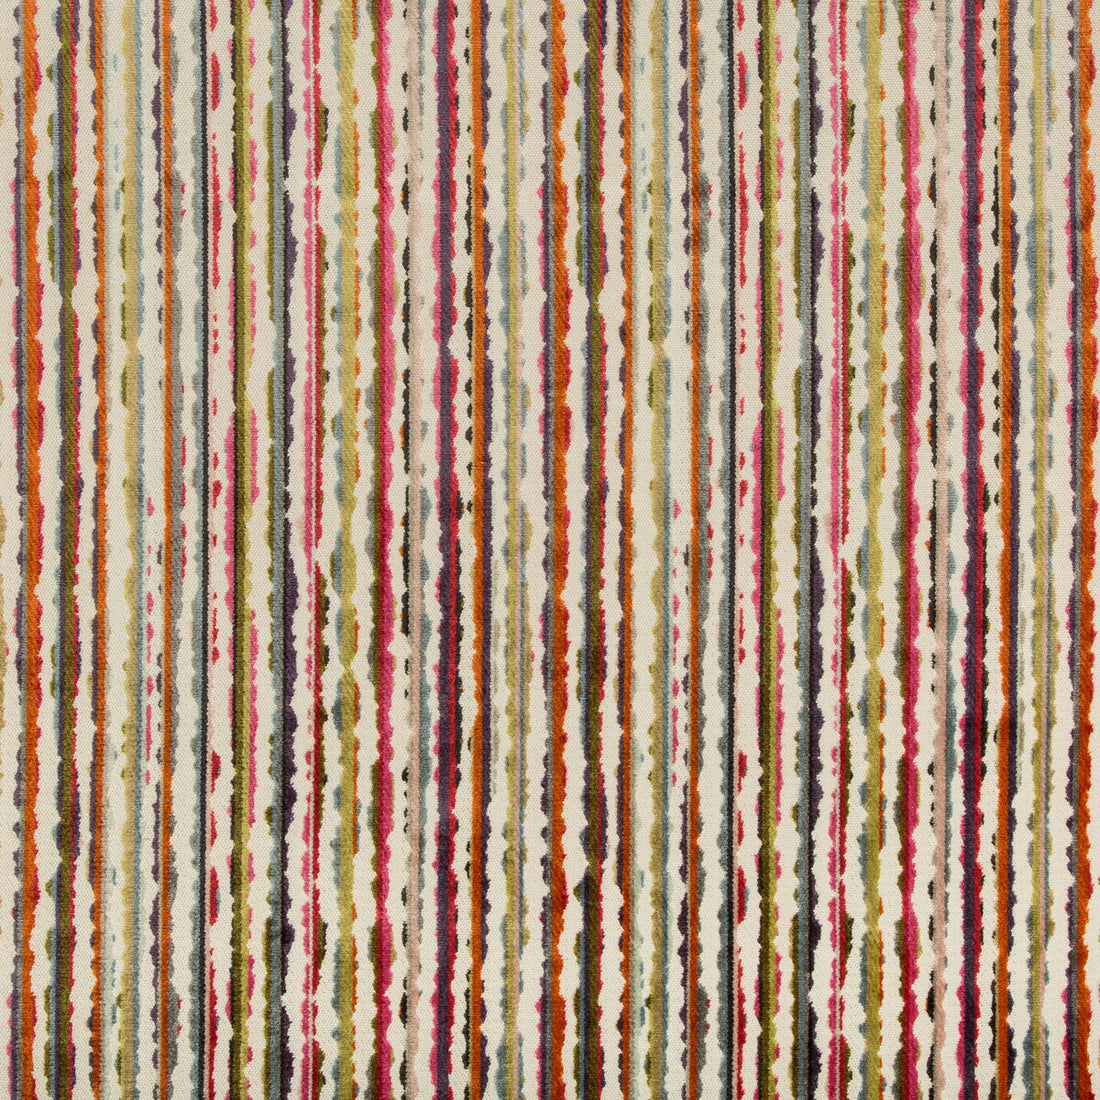 Dreamcoat fabric in confetti color - pattern 35541.19.0 - by Kravet Basics in the Bermuda collection